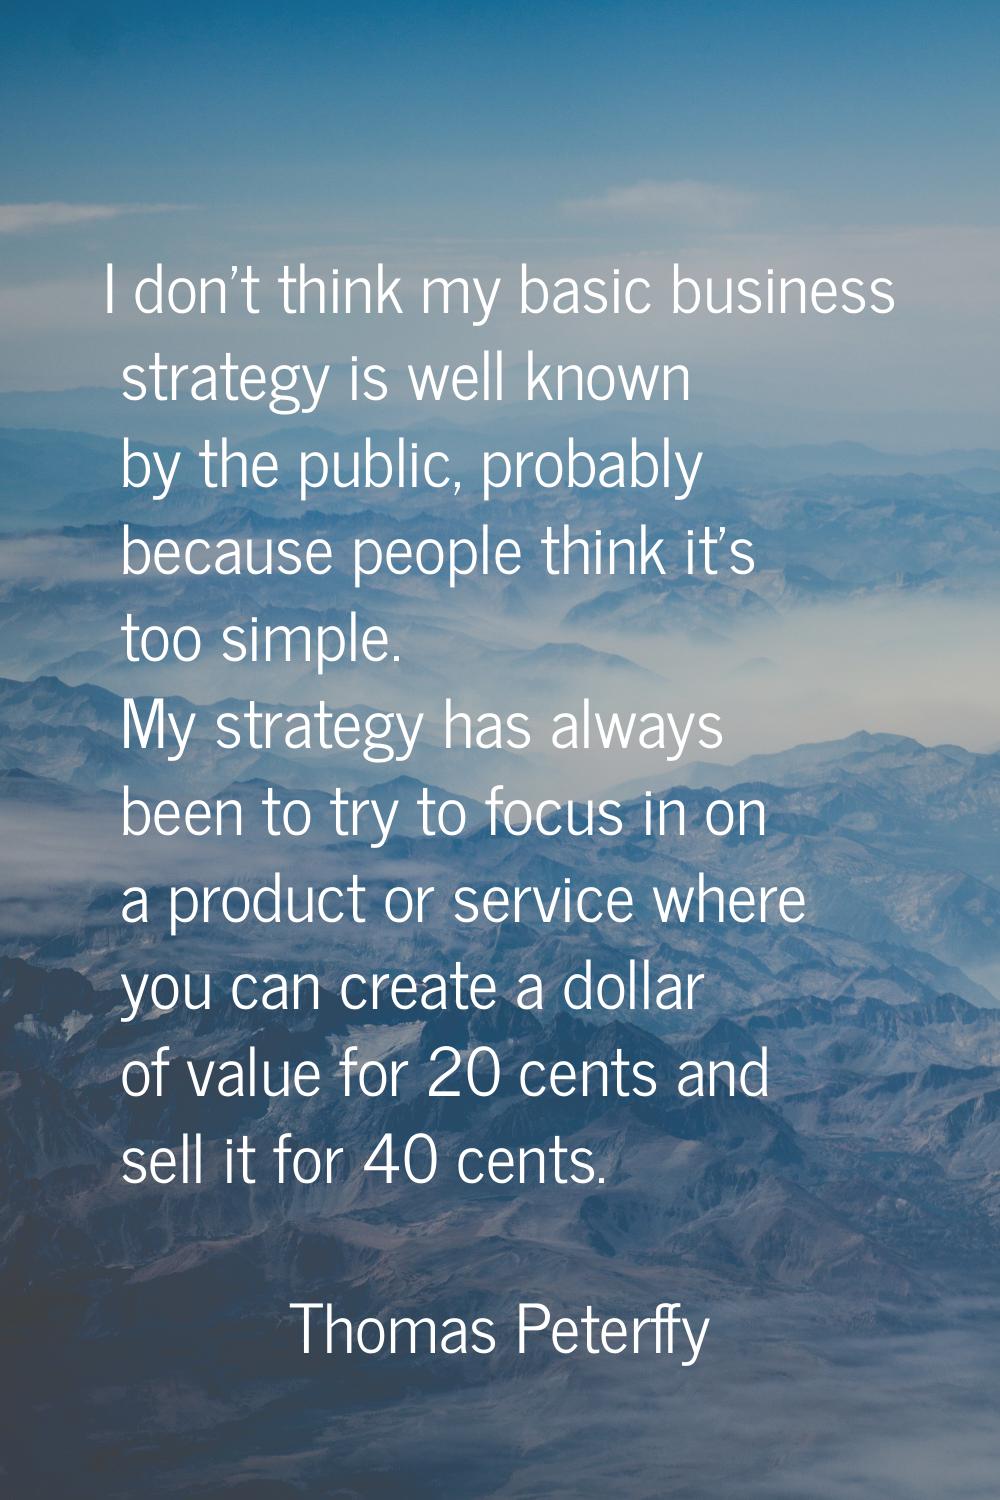 I don't think my basic business strategy is well known by the public, probably because people think